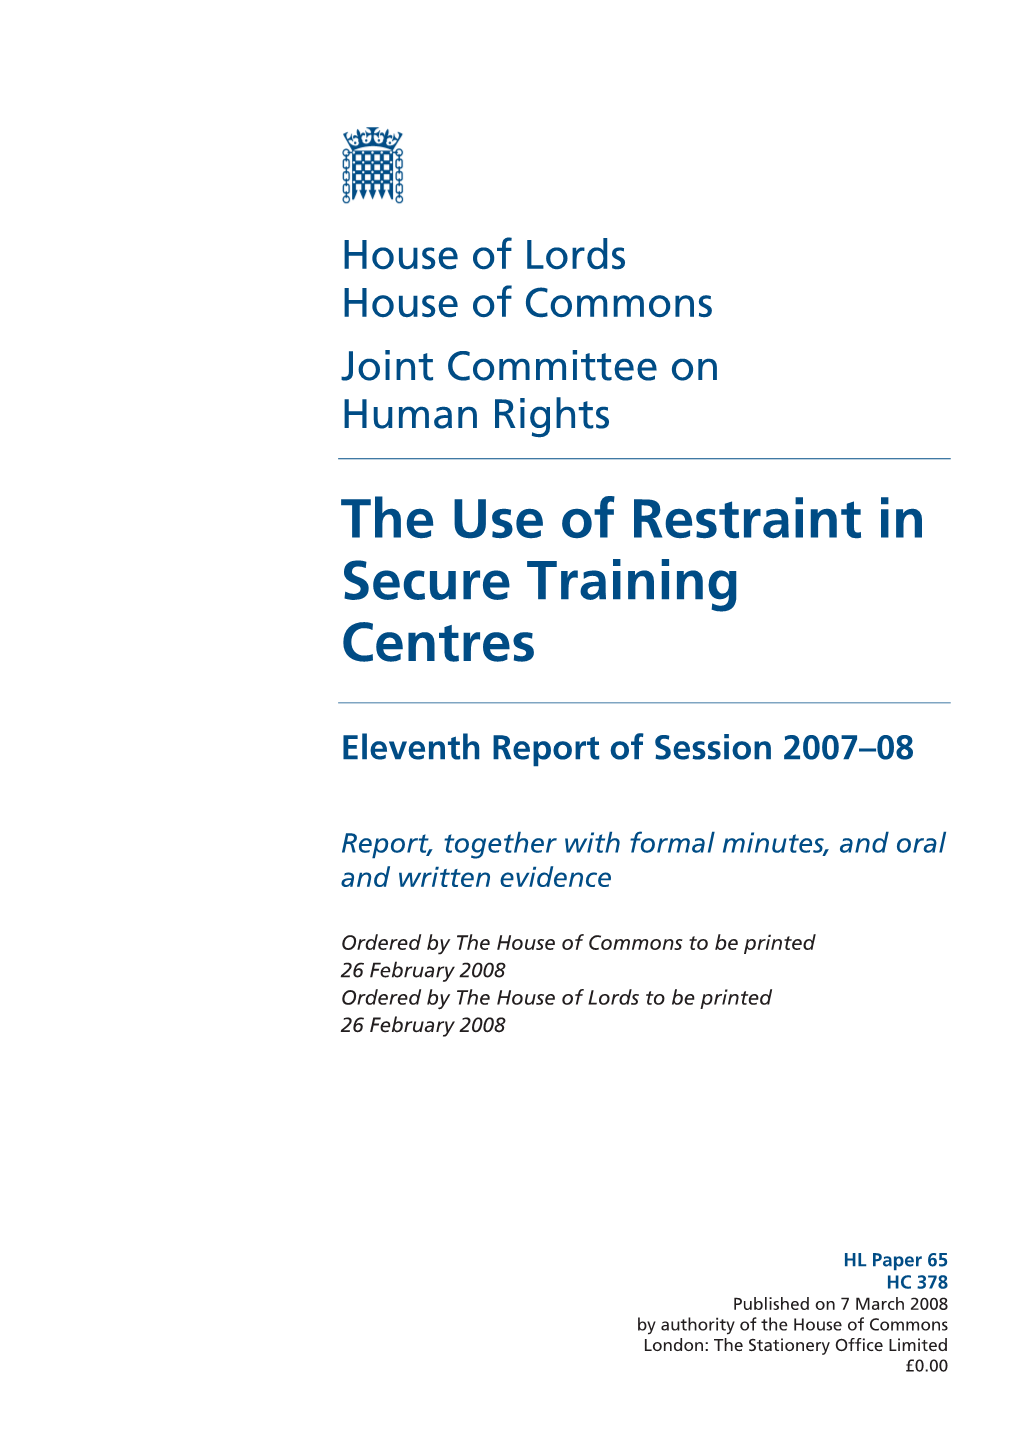 The Use of Restraint in Secure Training Centres